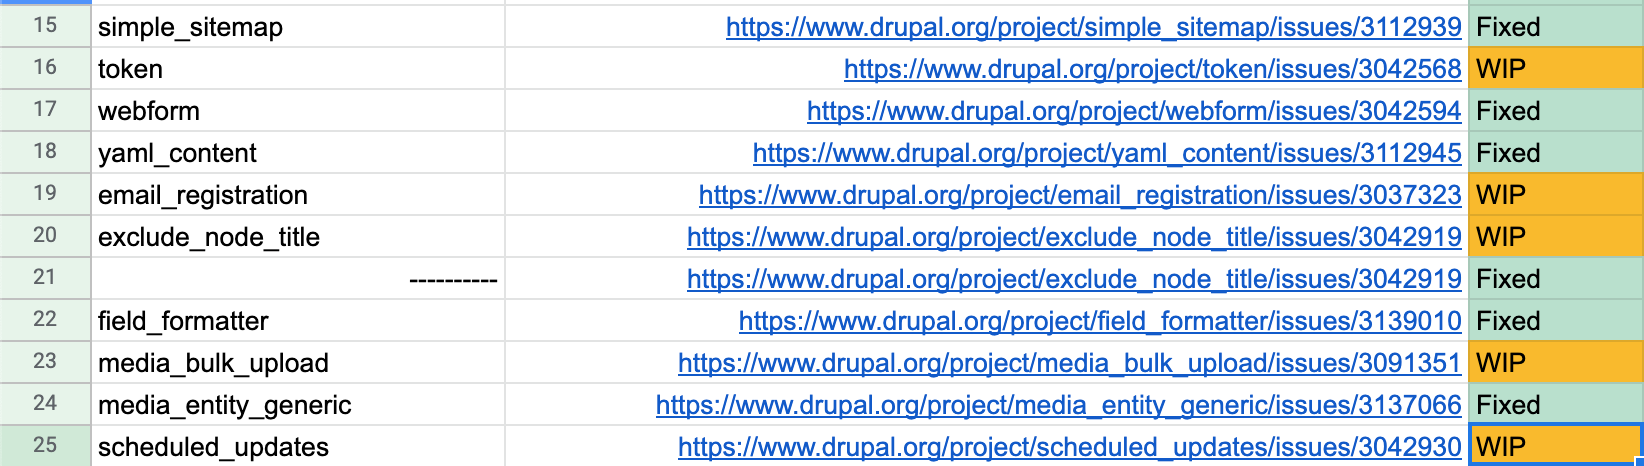 Tracking Drupal 9 issues in spreadsheet